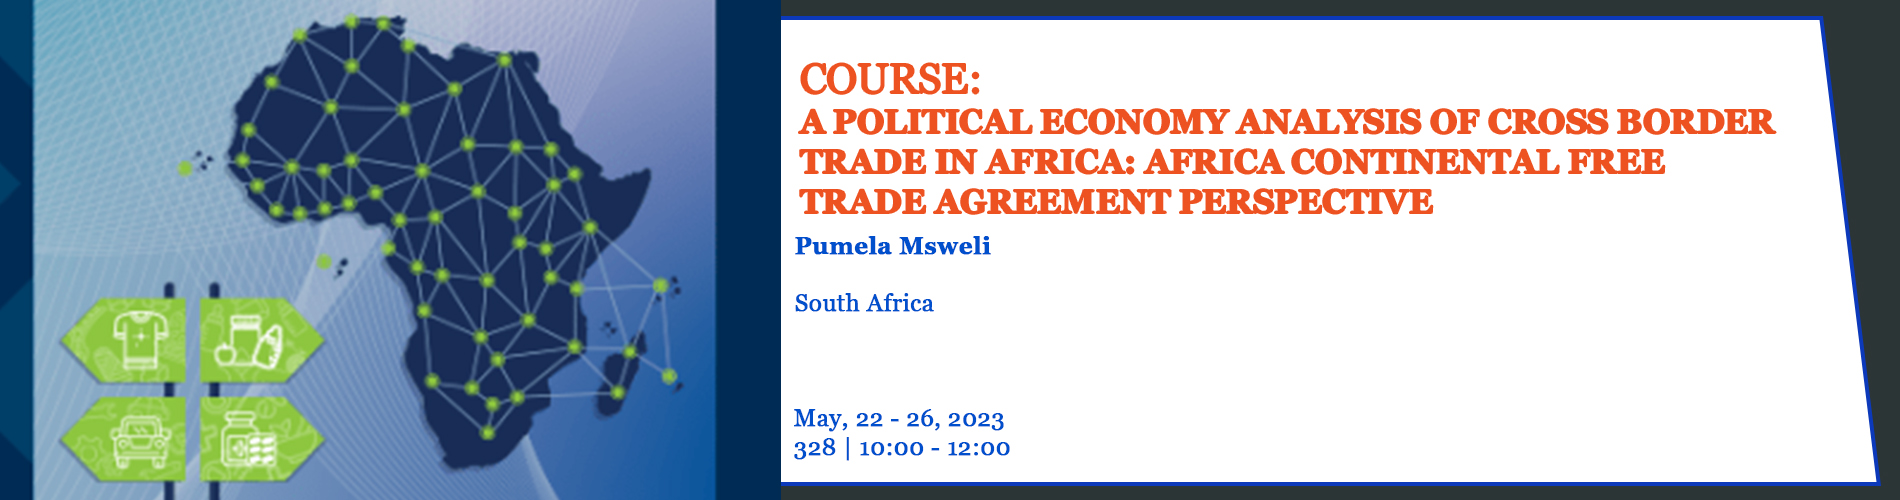 1-20230522-_20230526_-_A_political_Economy_Analysis_of_Cross_Border_Trade_in_Africa